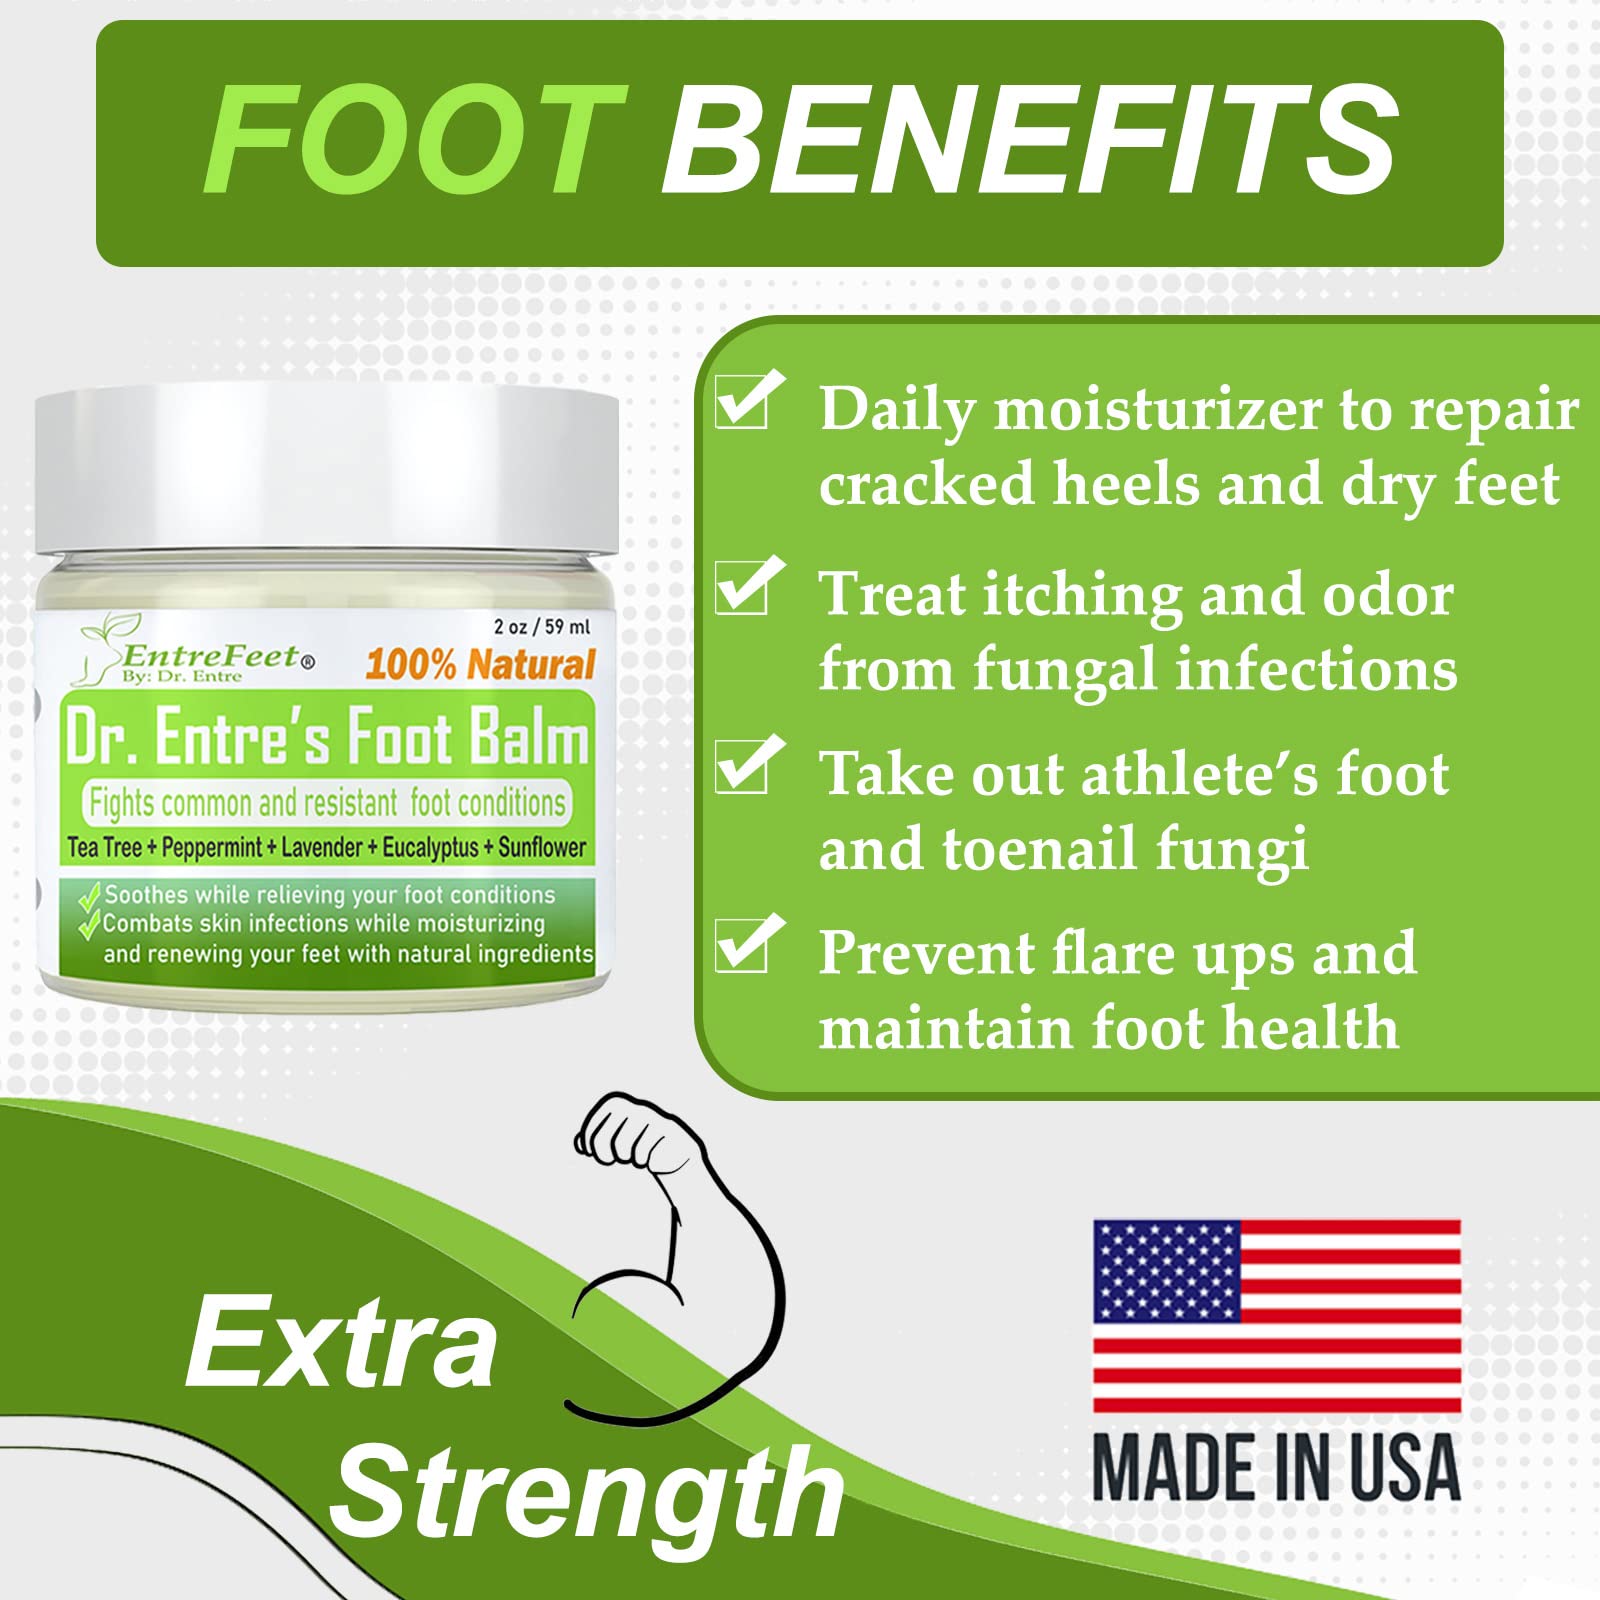 Dr. Entre's Foot Balm: Tea Tree Oil & Shea Butter Based - Organic Treatment Cream for Athletes Foot, Dry Feet, Cracked Heels, Itching, and Odor - Foot Care E-Book Included